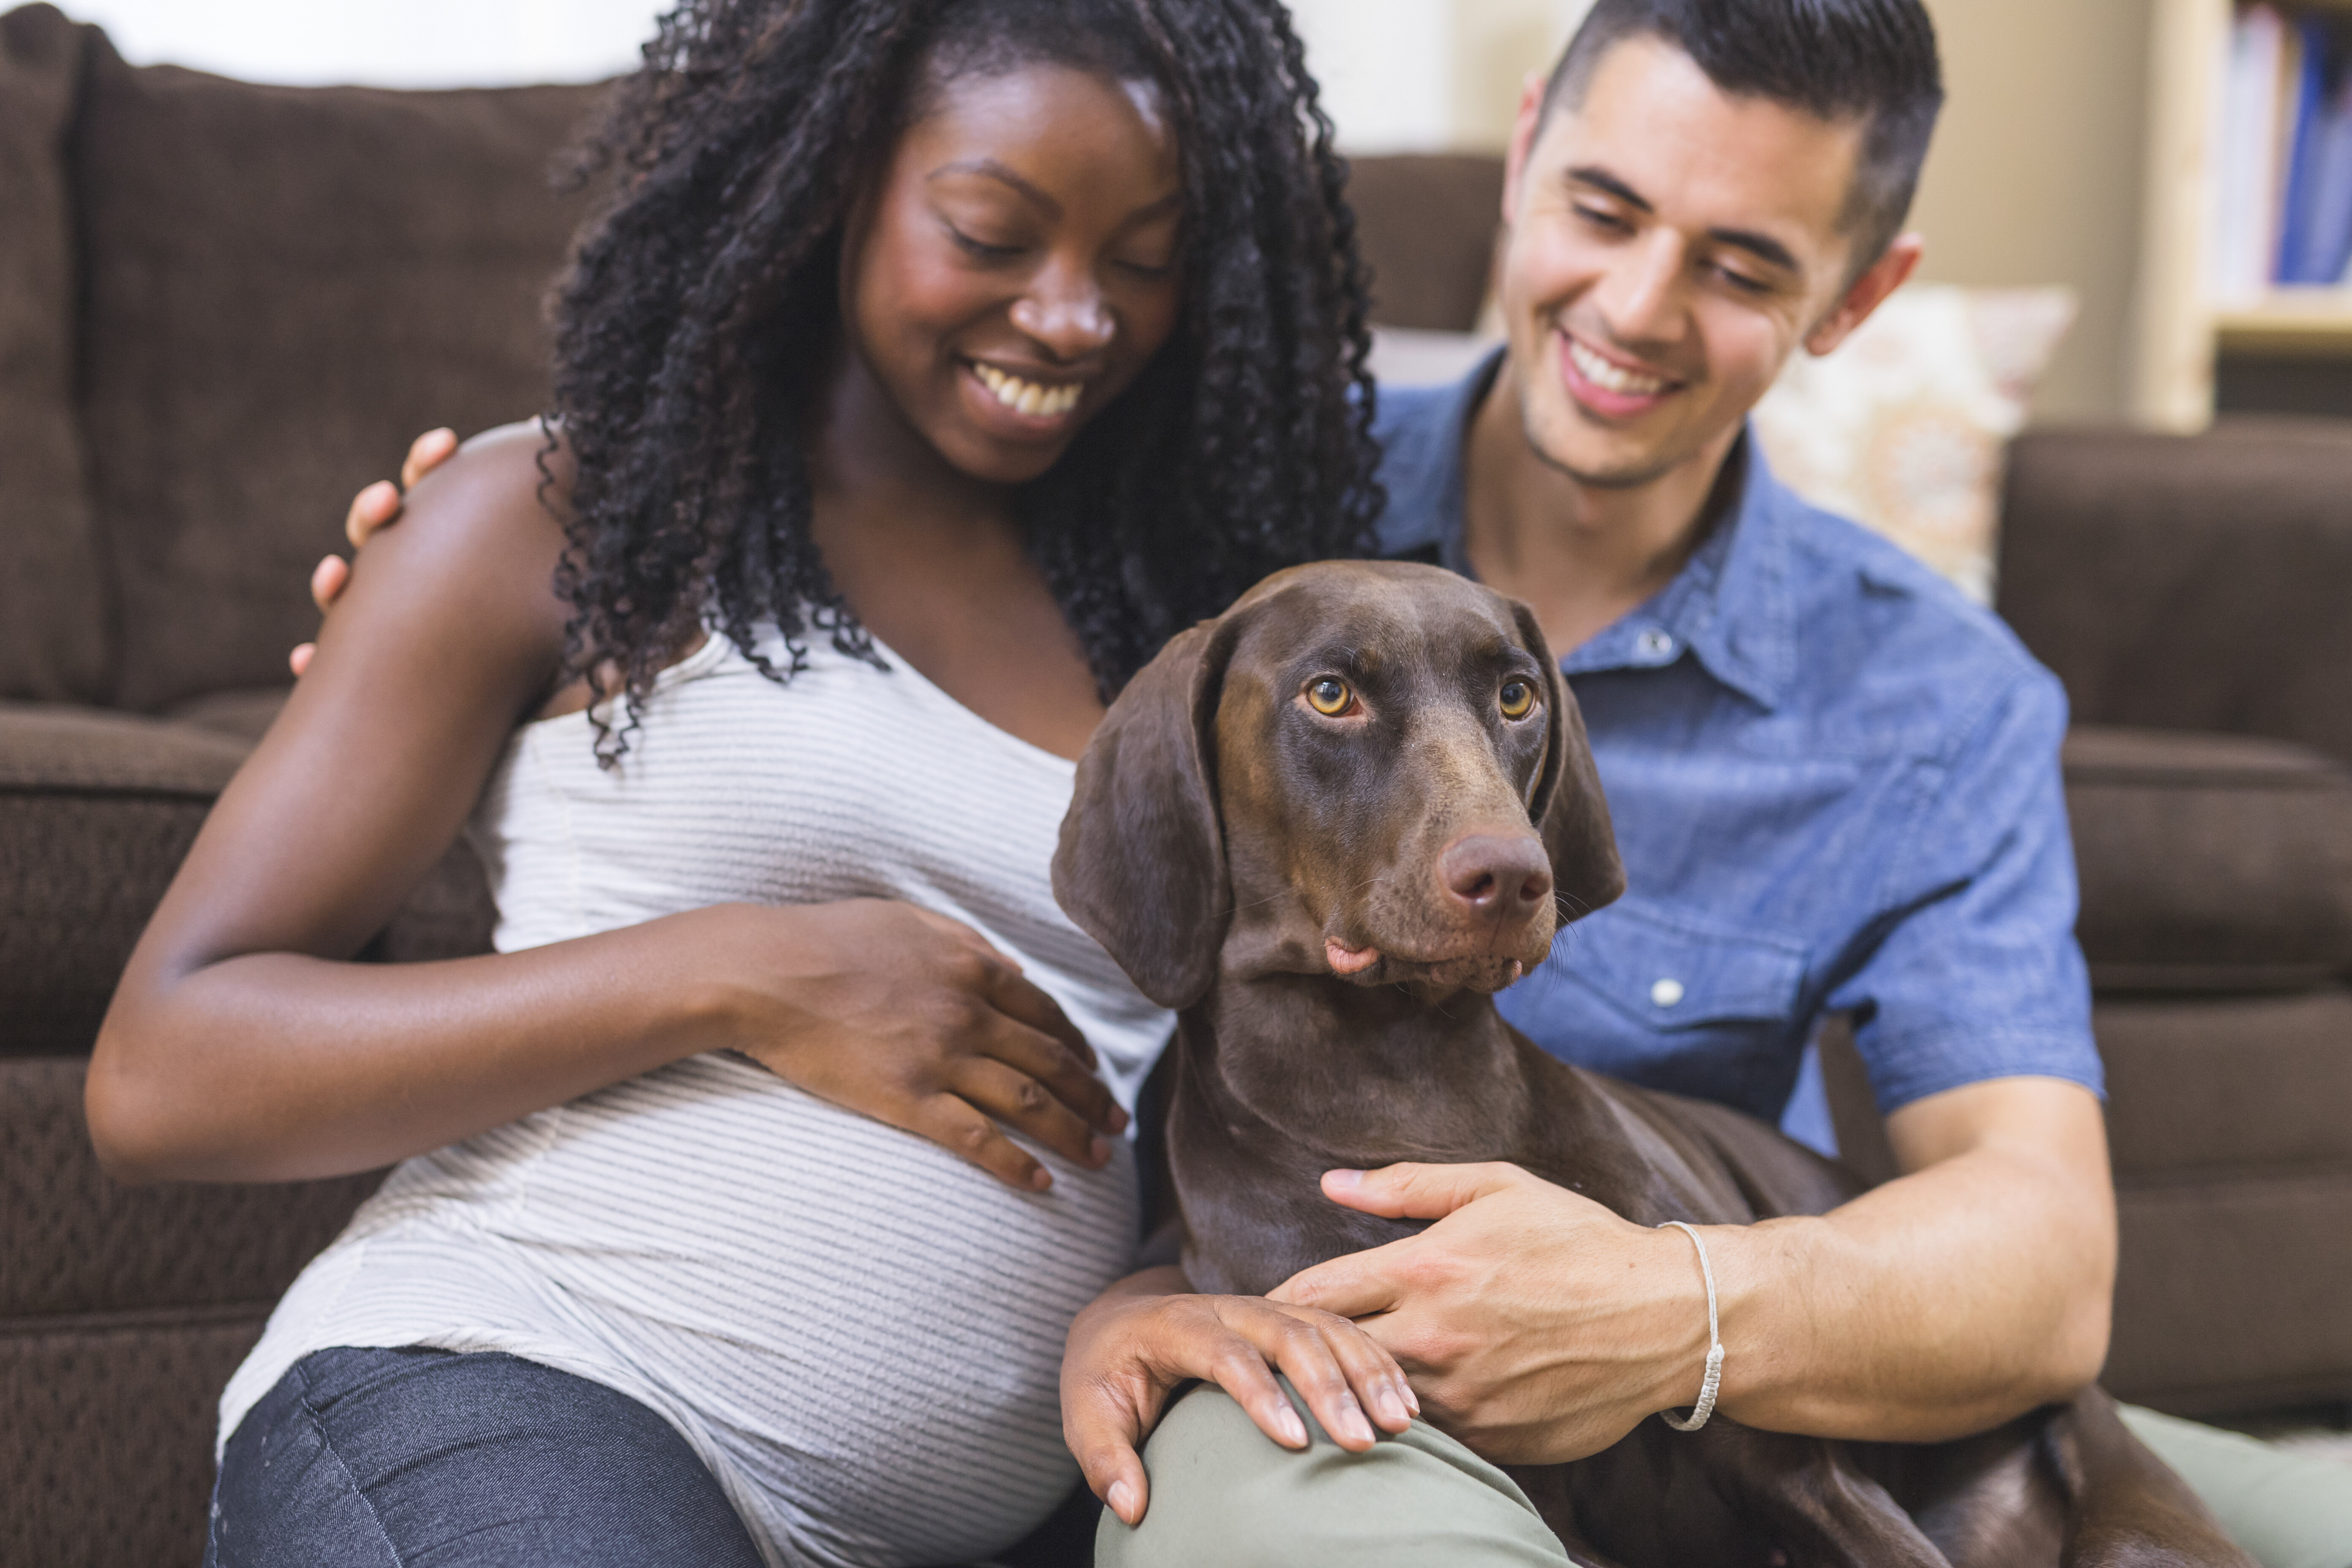 can your dog sense you are pregnant